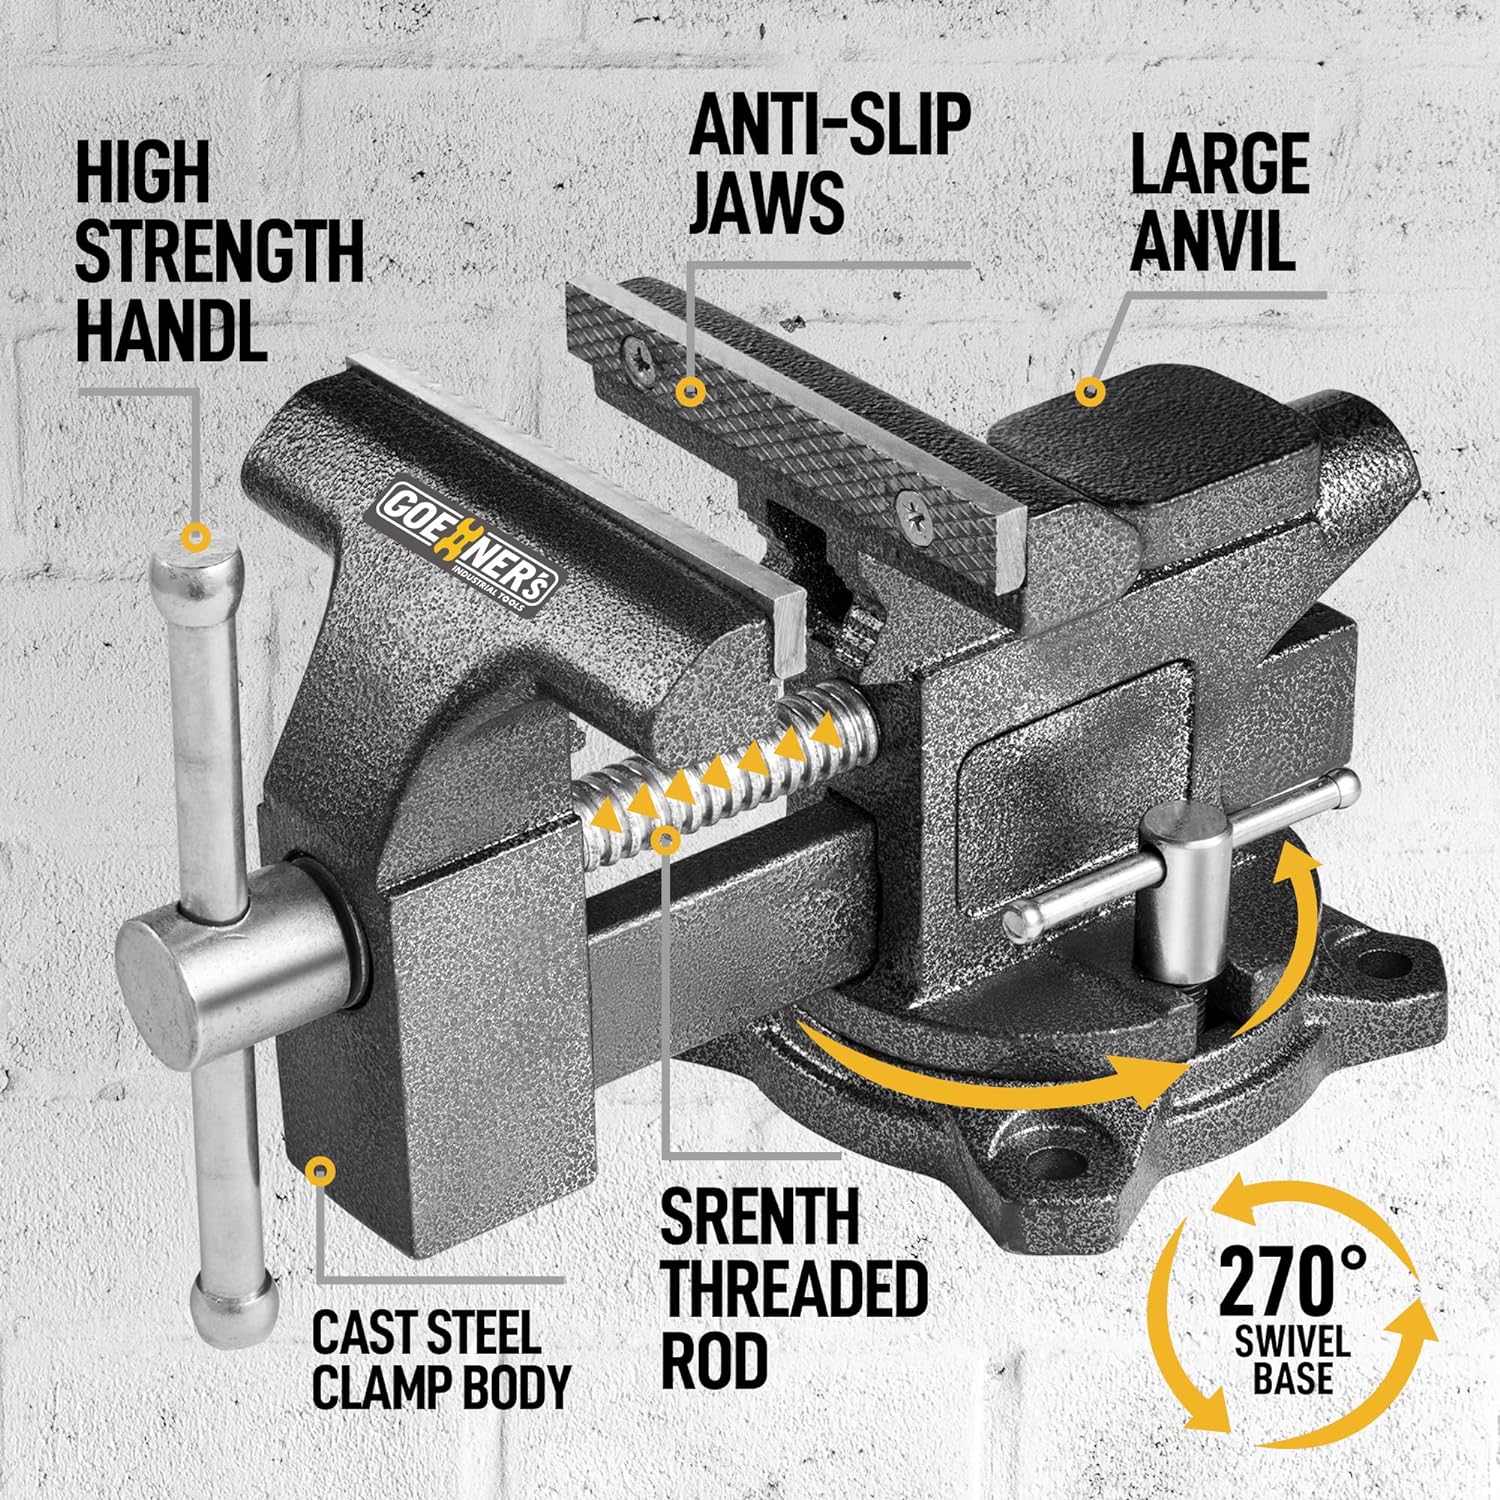 Kitvance Bench Vise, 4-1/2" Vice for Workbench, Utility Combination Pipe Home Vise with Heavy Duty Forged Steel Construction, Swive